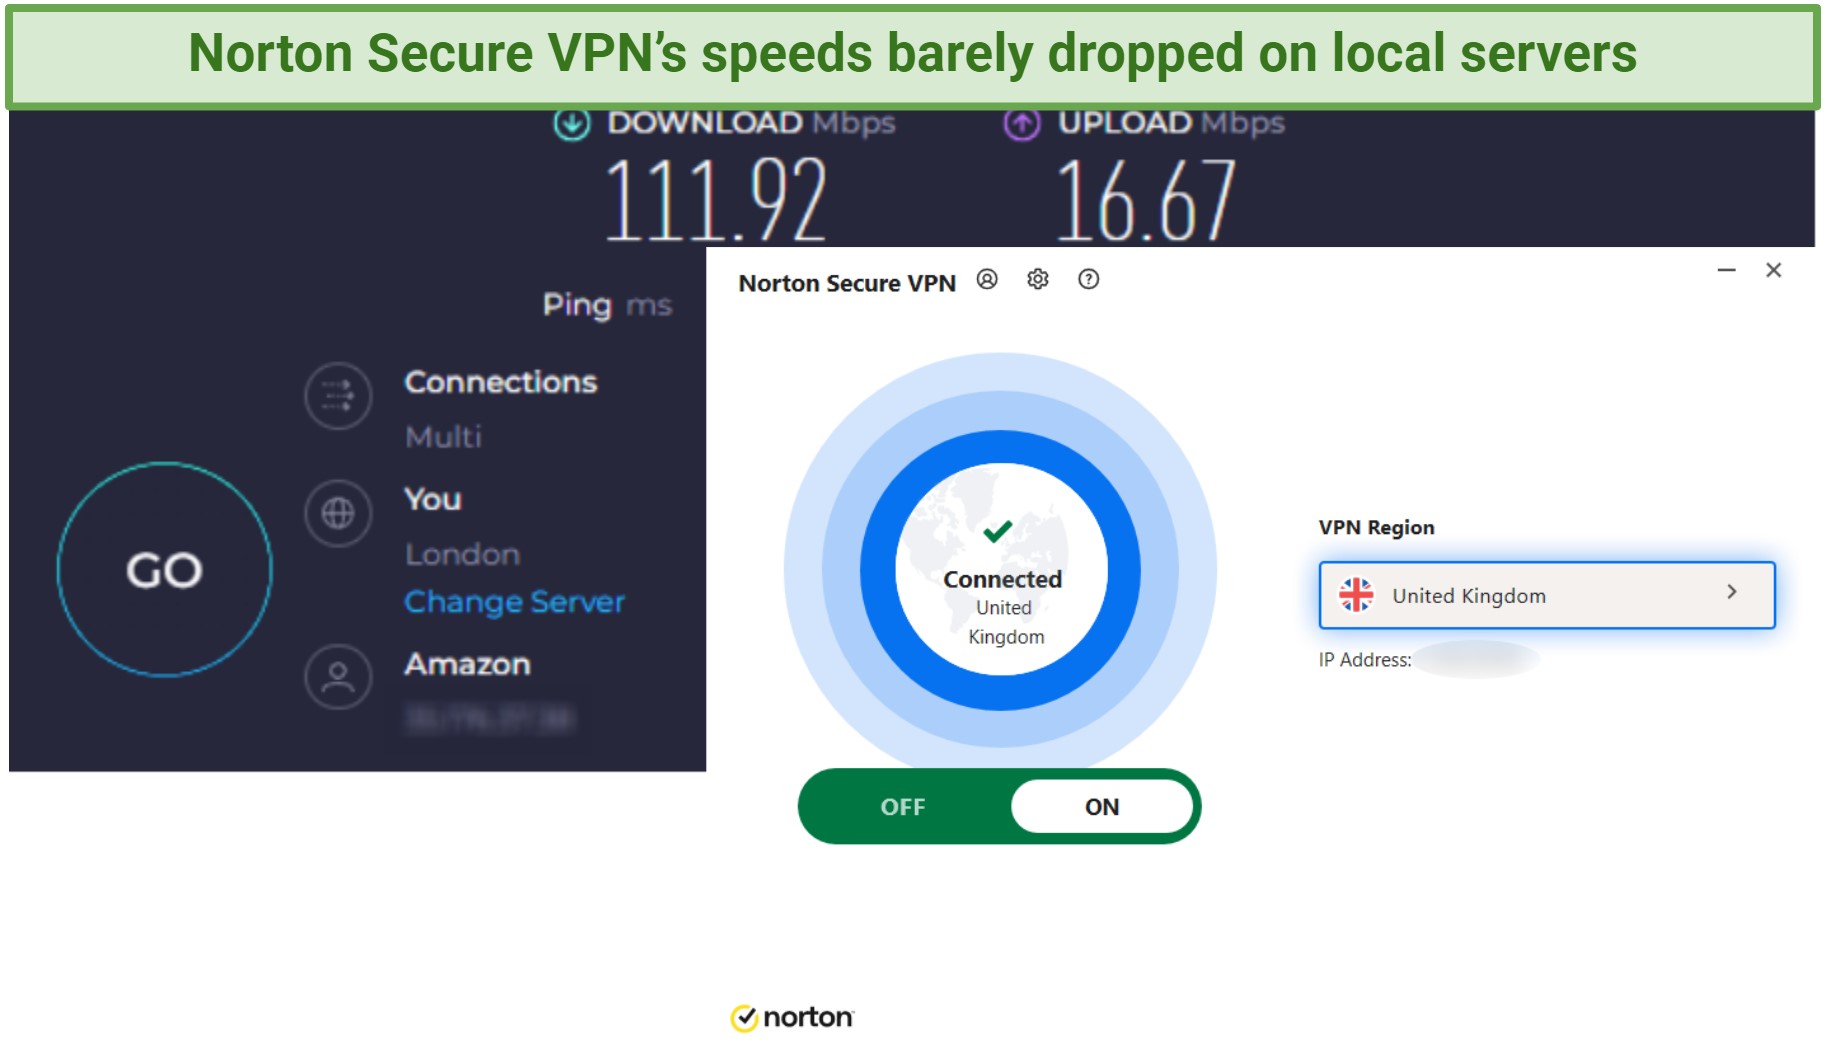 Screenshot of Ookla speed test recording Norton Secure VPN's speeds on the nearby UK server